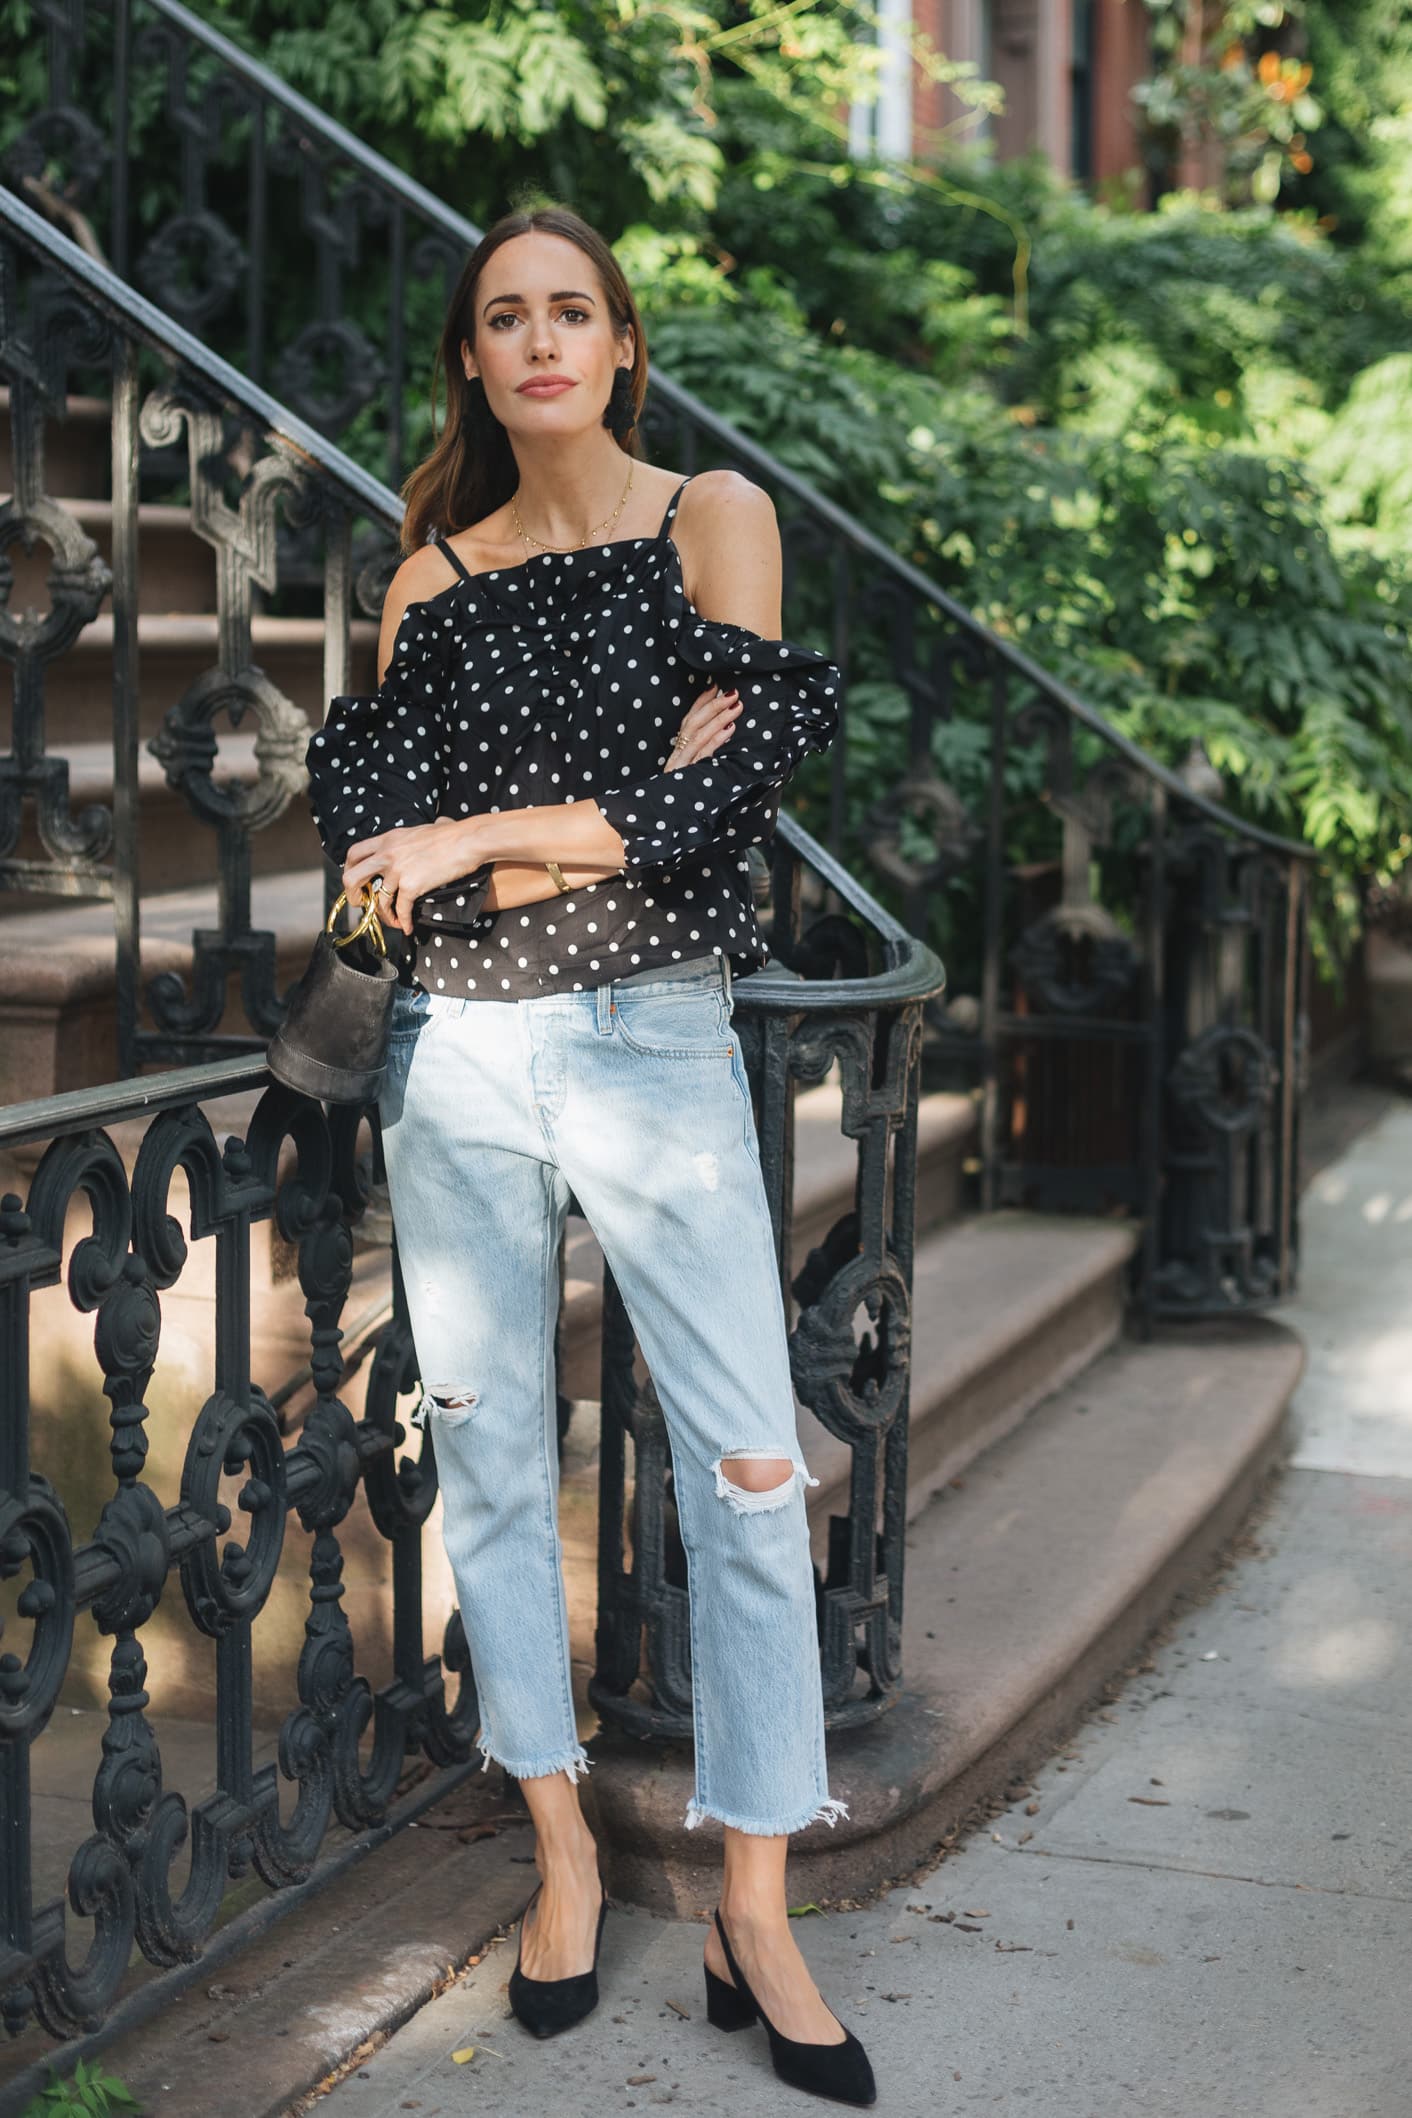 Louise Roe wearing polka dot top and mom jeans in NYC